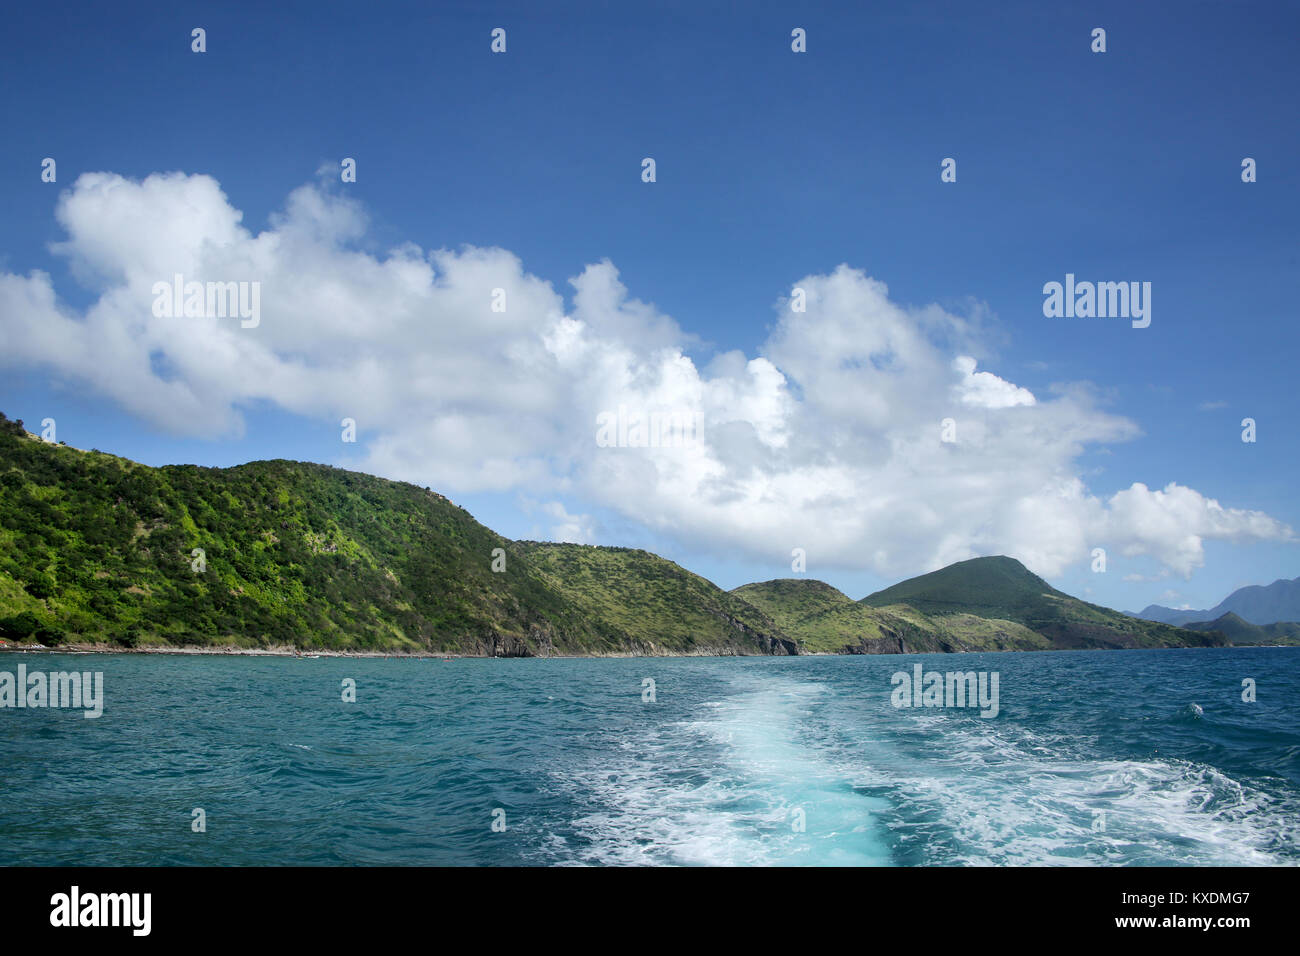 View of the coastline from the sea with the wake of the boat, St Kitts, Caribbean. Stock Photo